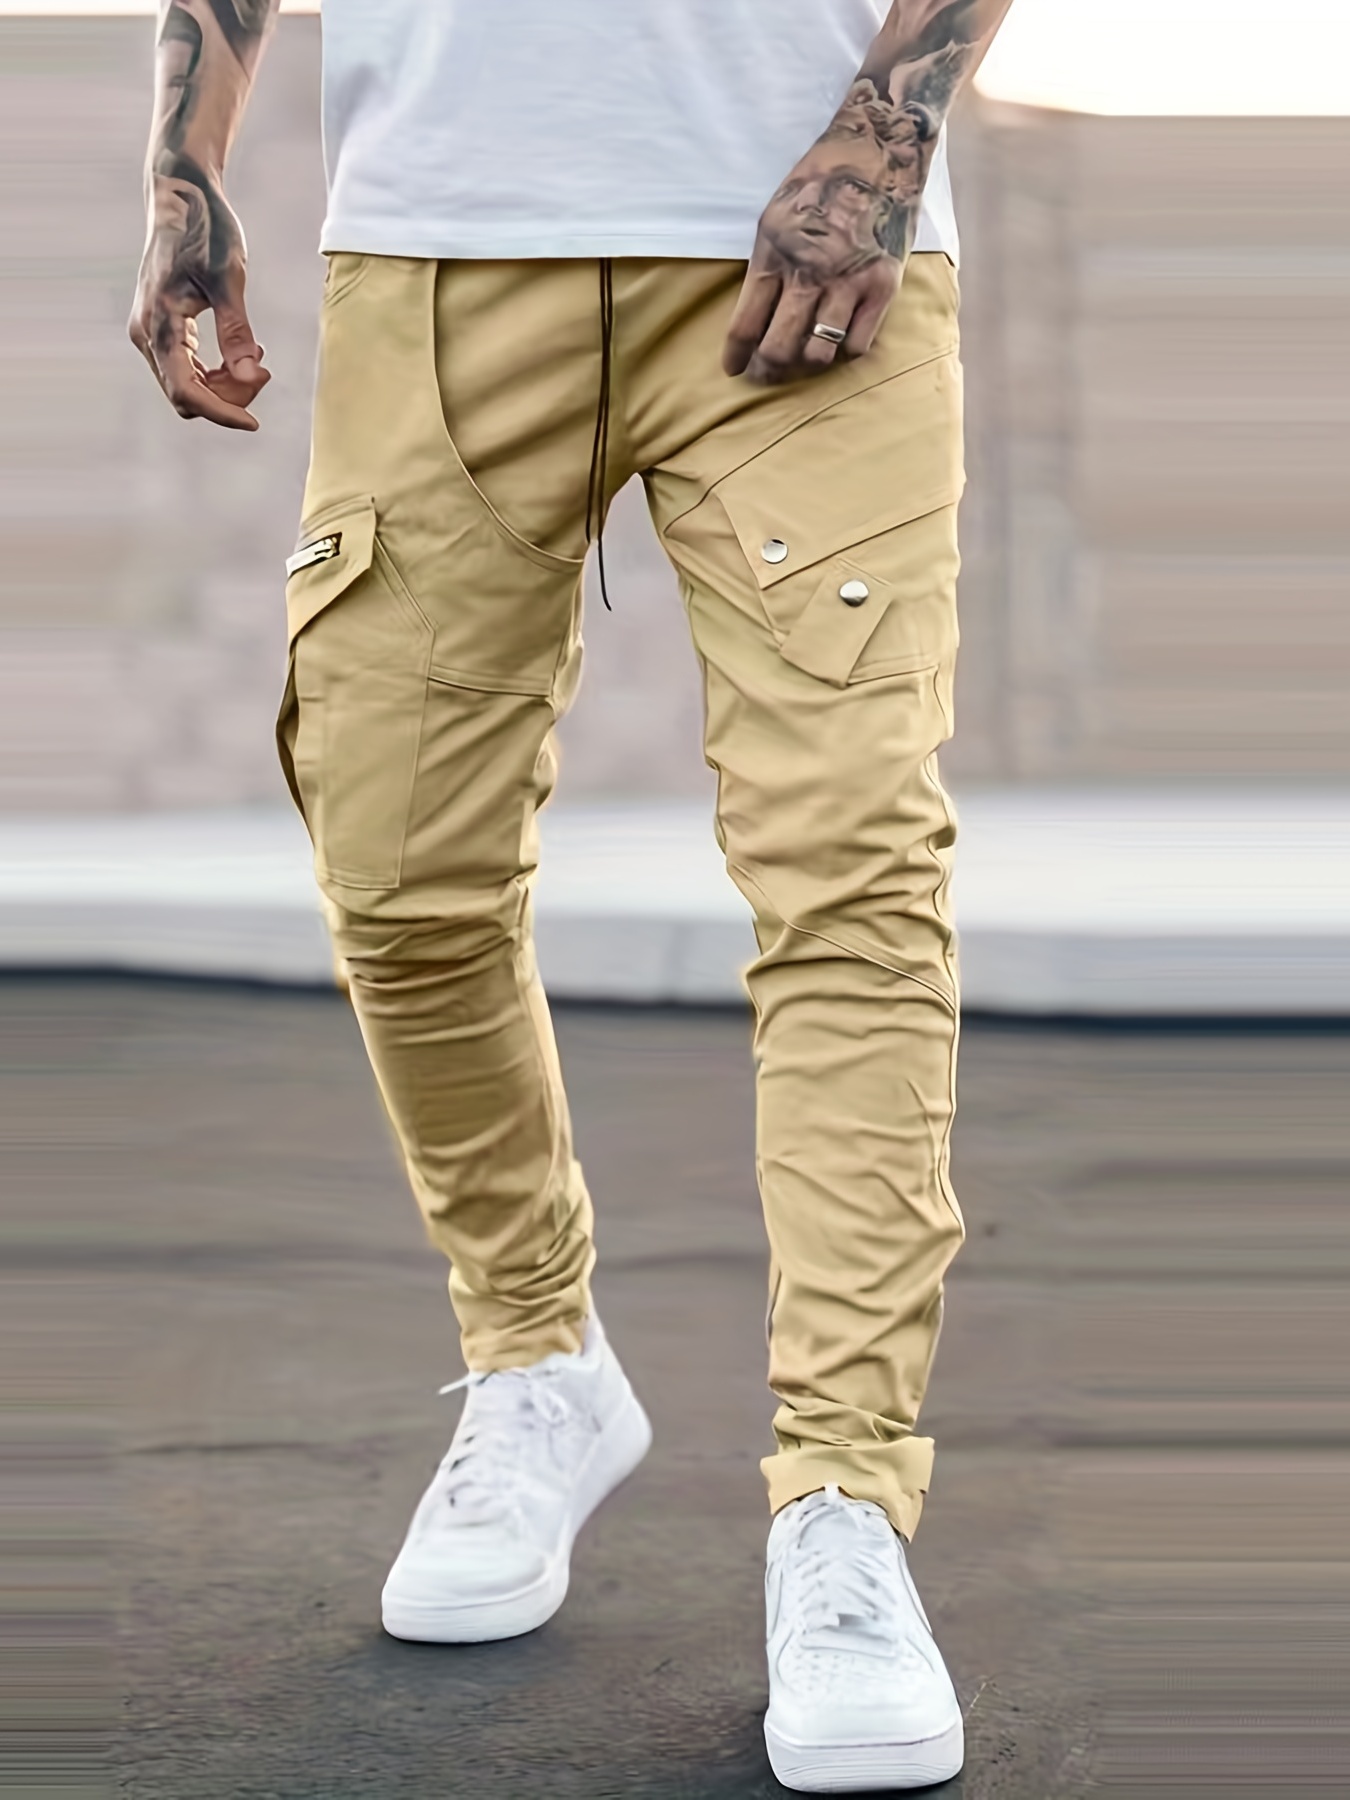 Slim Fit Zipped Pocket Cargo Pants  Streetwear at Before the High Street